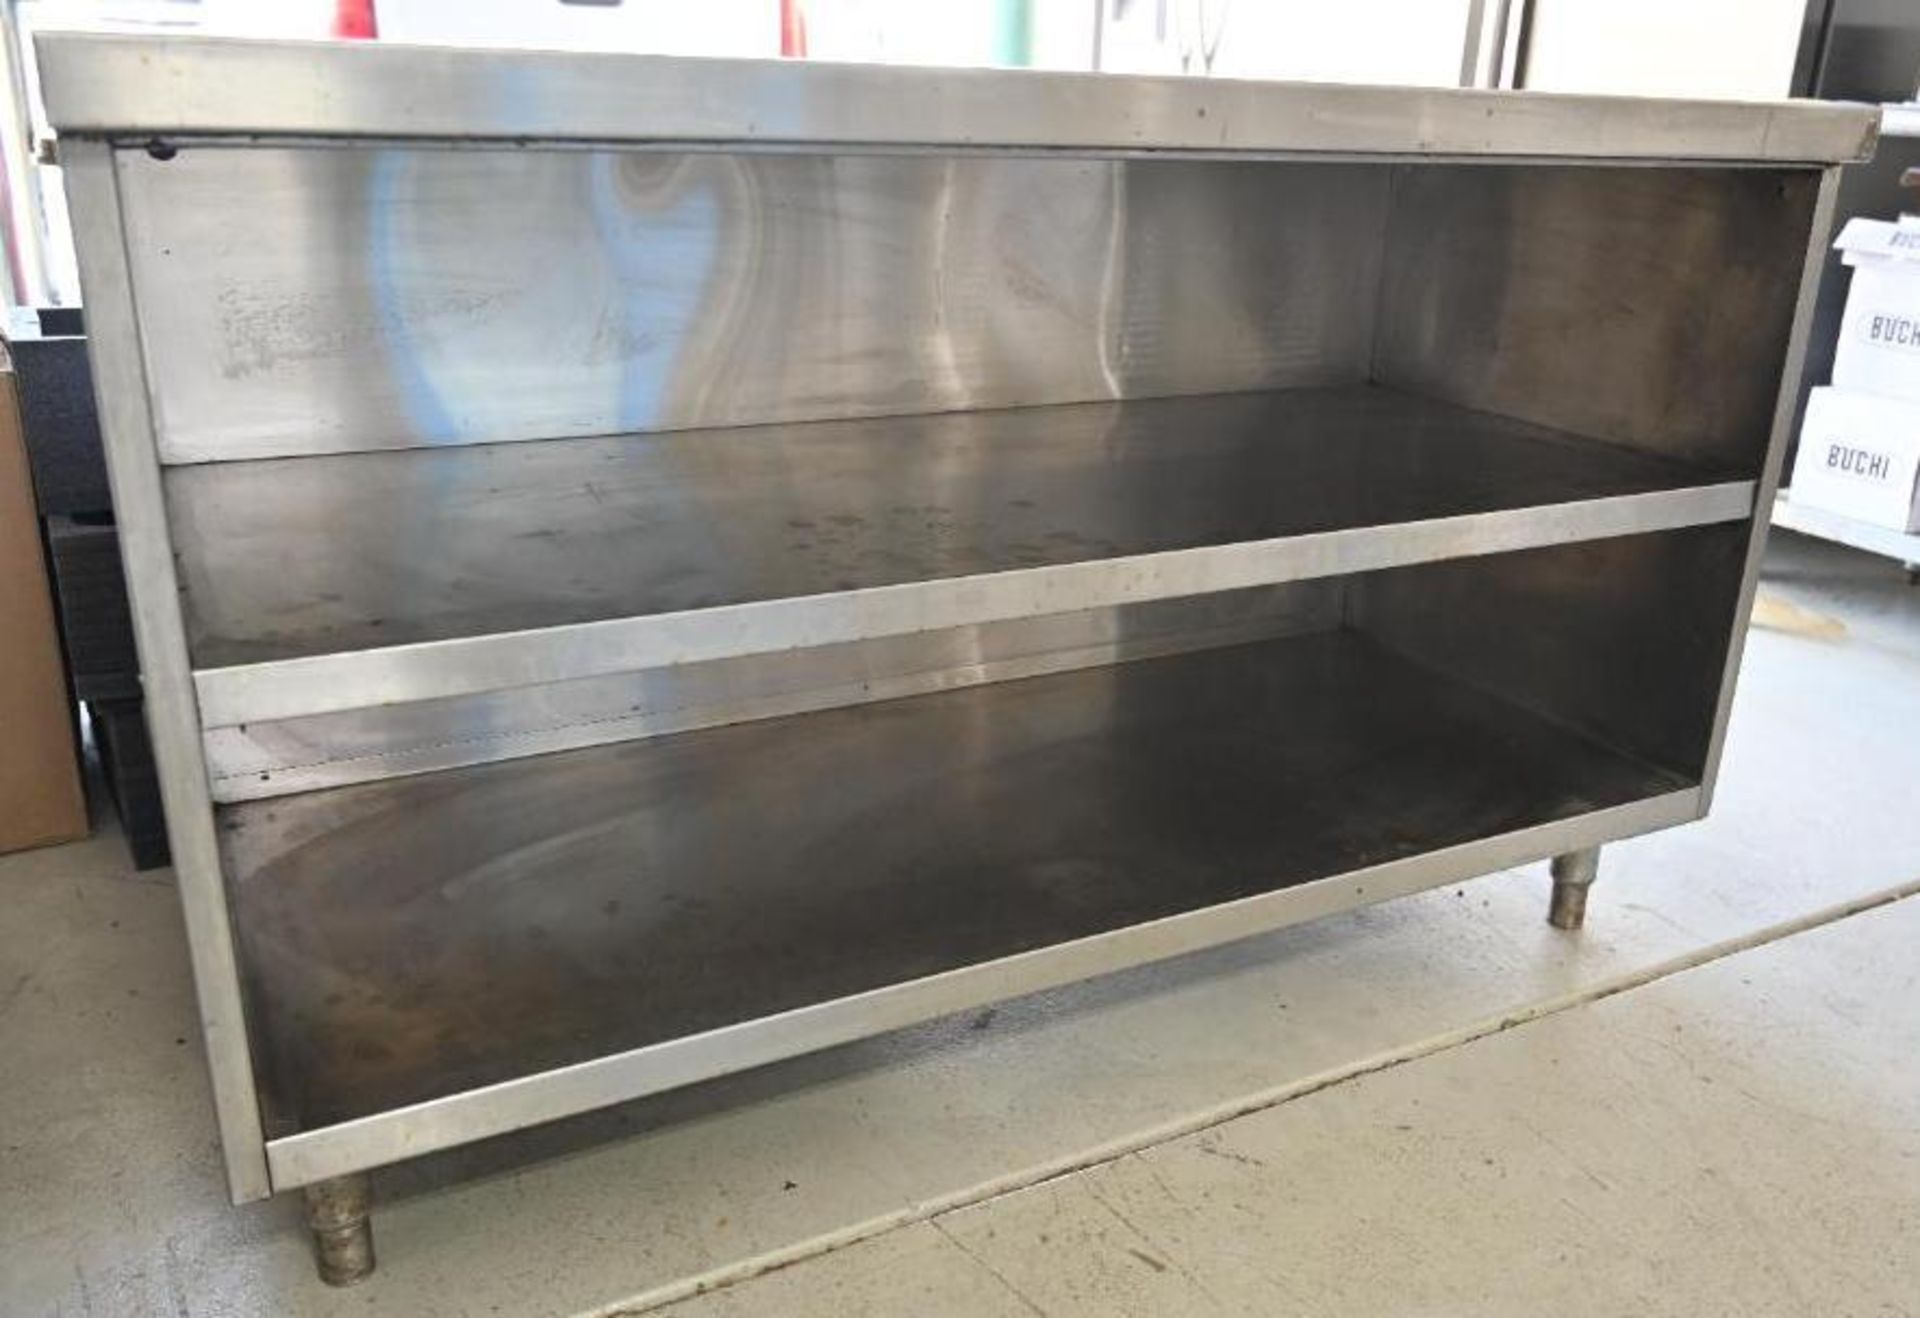 56.25" x 34" x 34.25" Stainless Steel Table with Two Shelves - Image 3 of 10